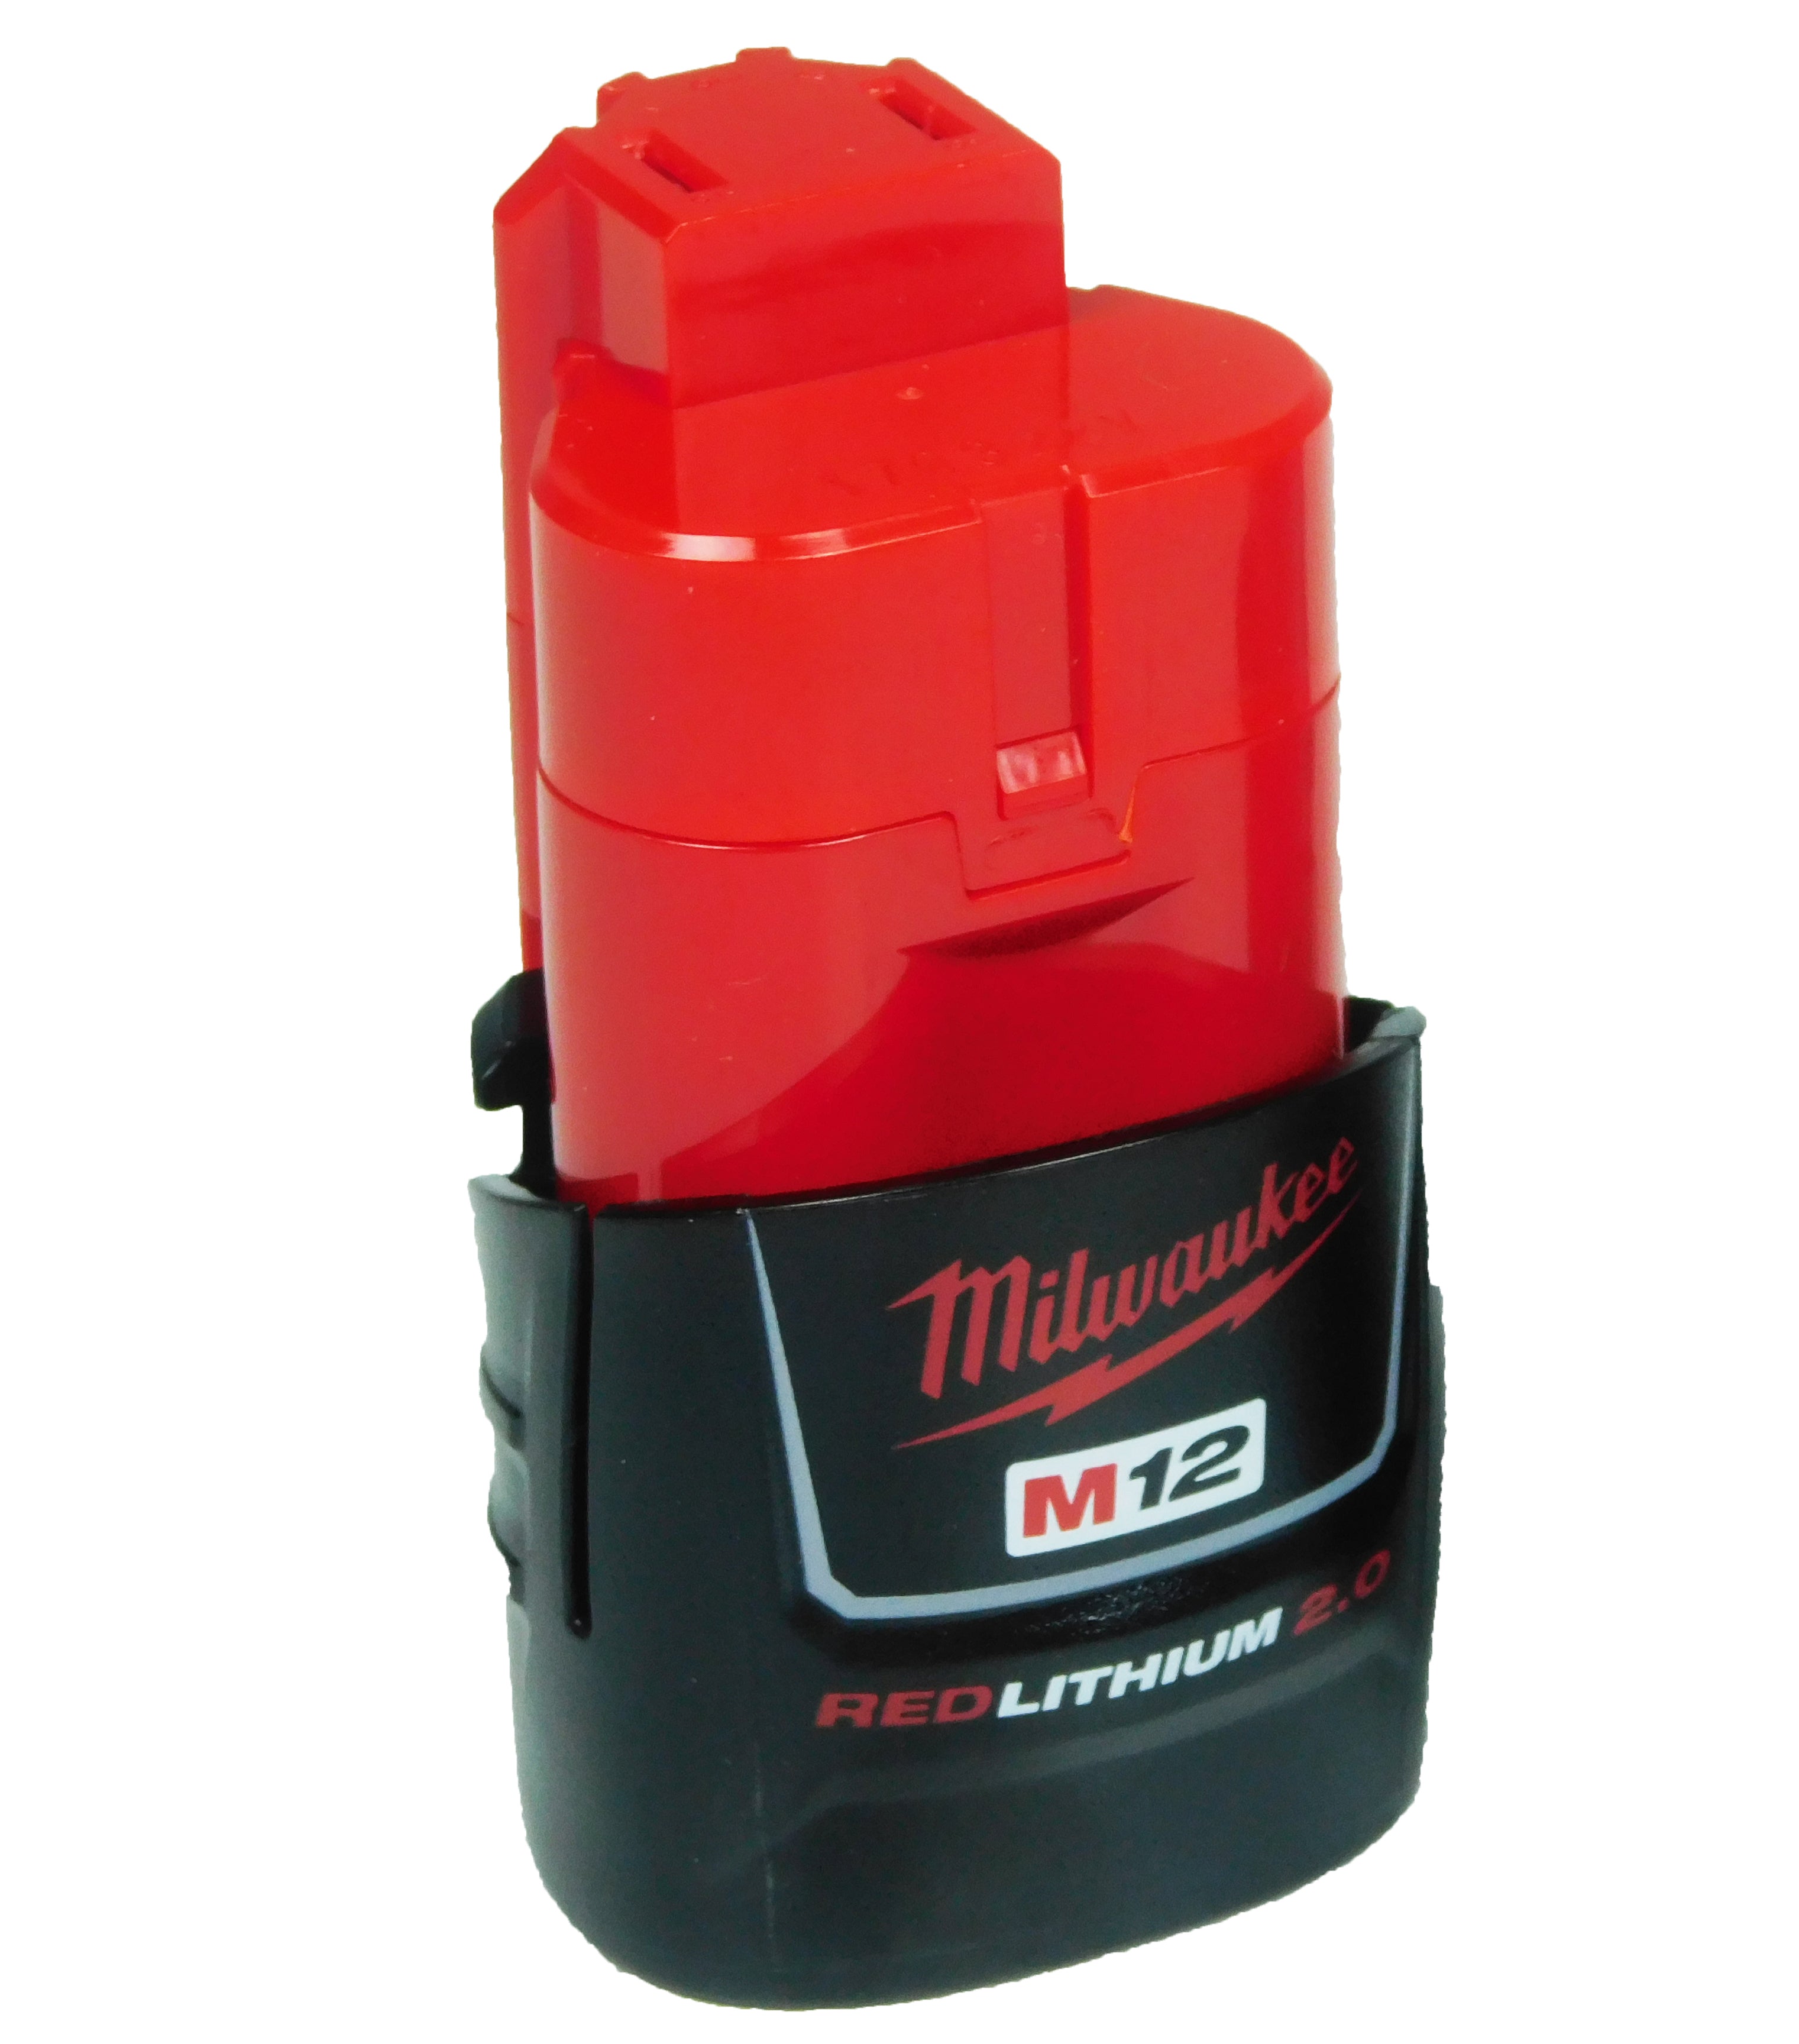 Milwaukee 48-11-2420 12V volt MAX Lithium Ion Battery Pack 2 Ah Single Pack